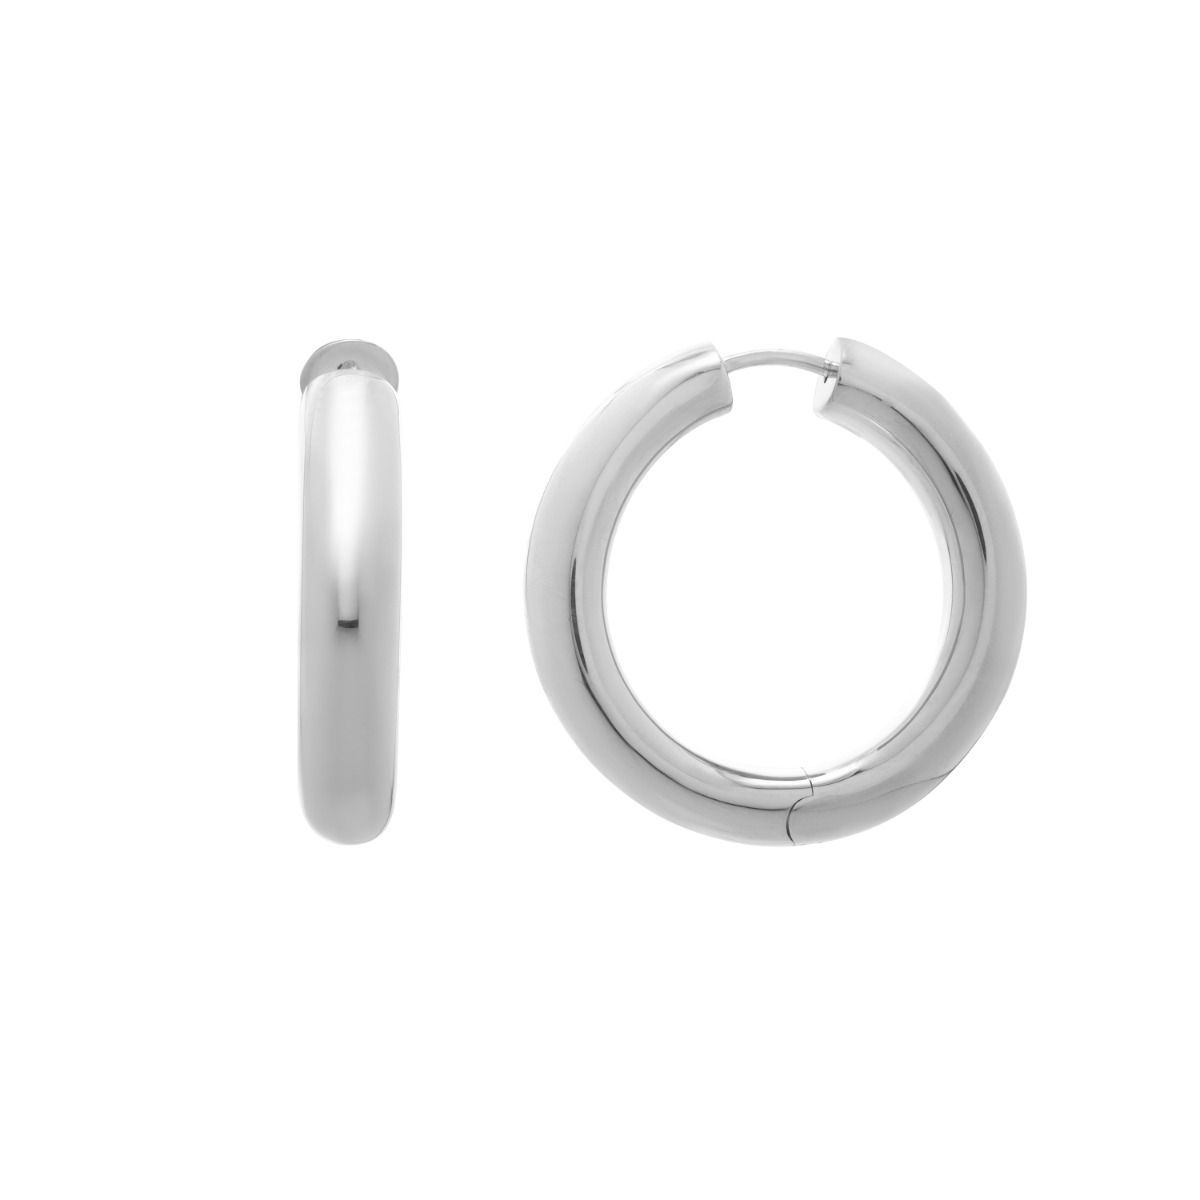 1.0 Inch Silver Plated Round Snap Clasp Hoops